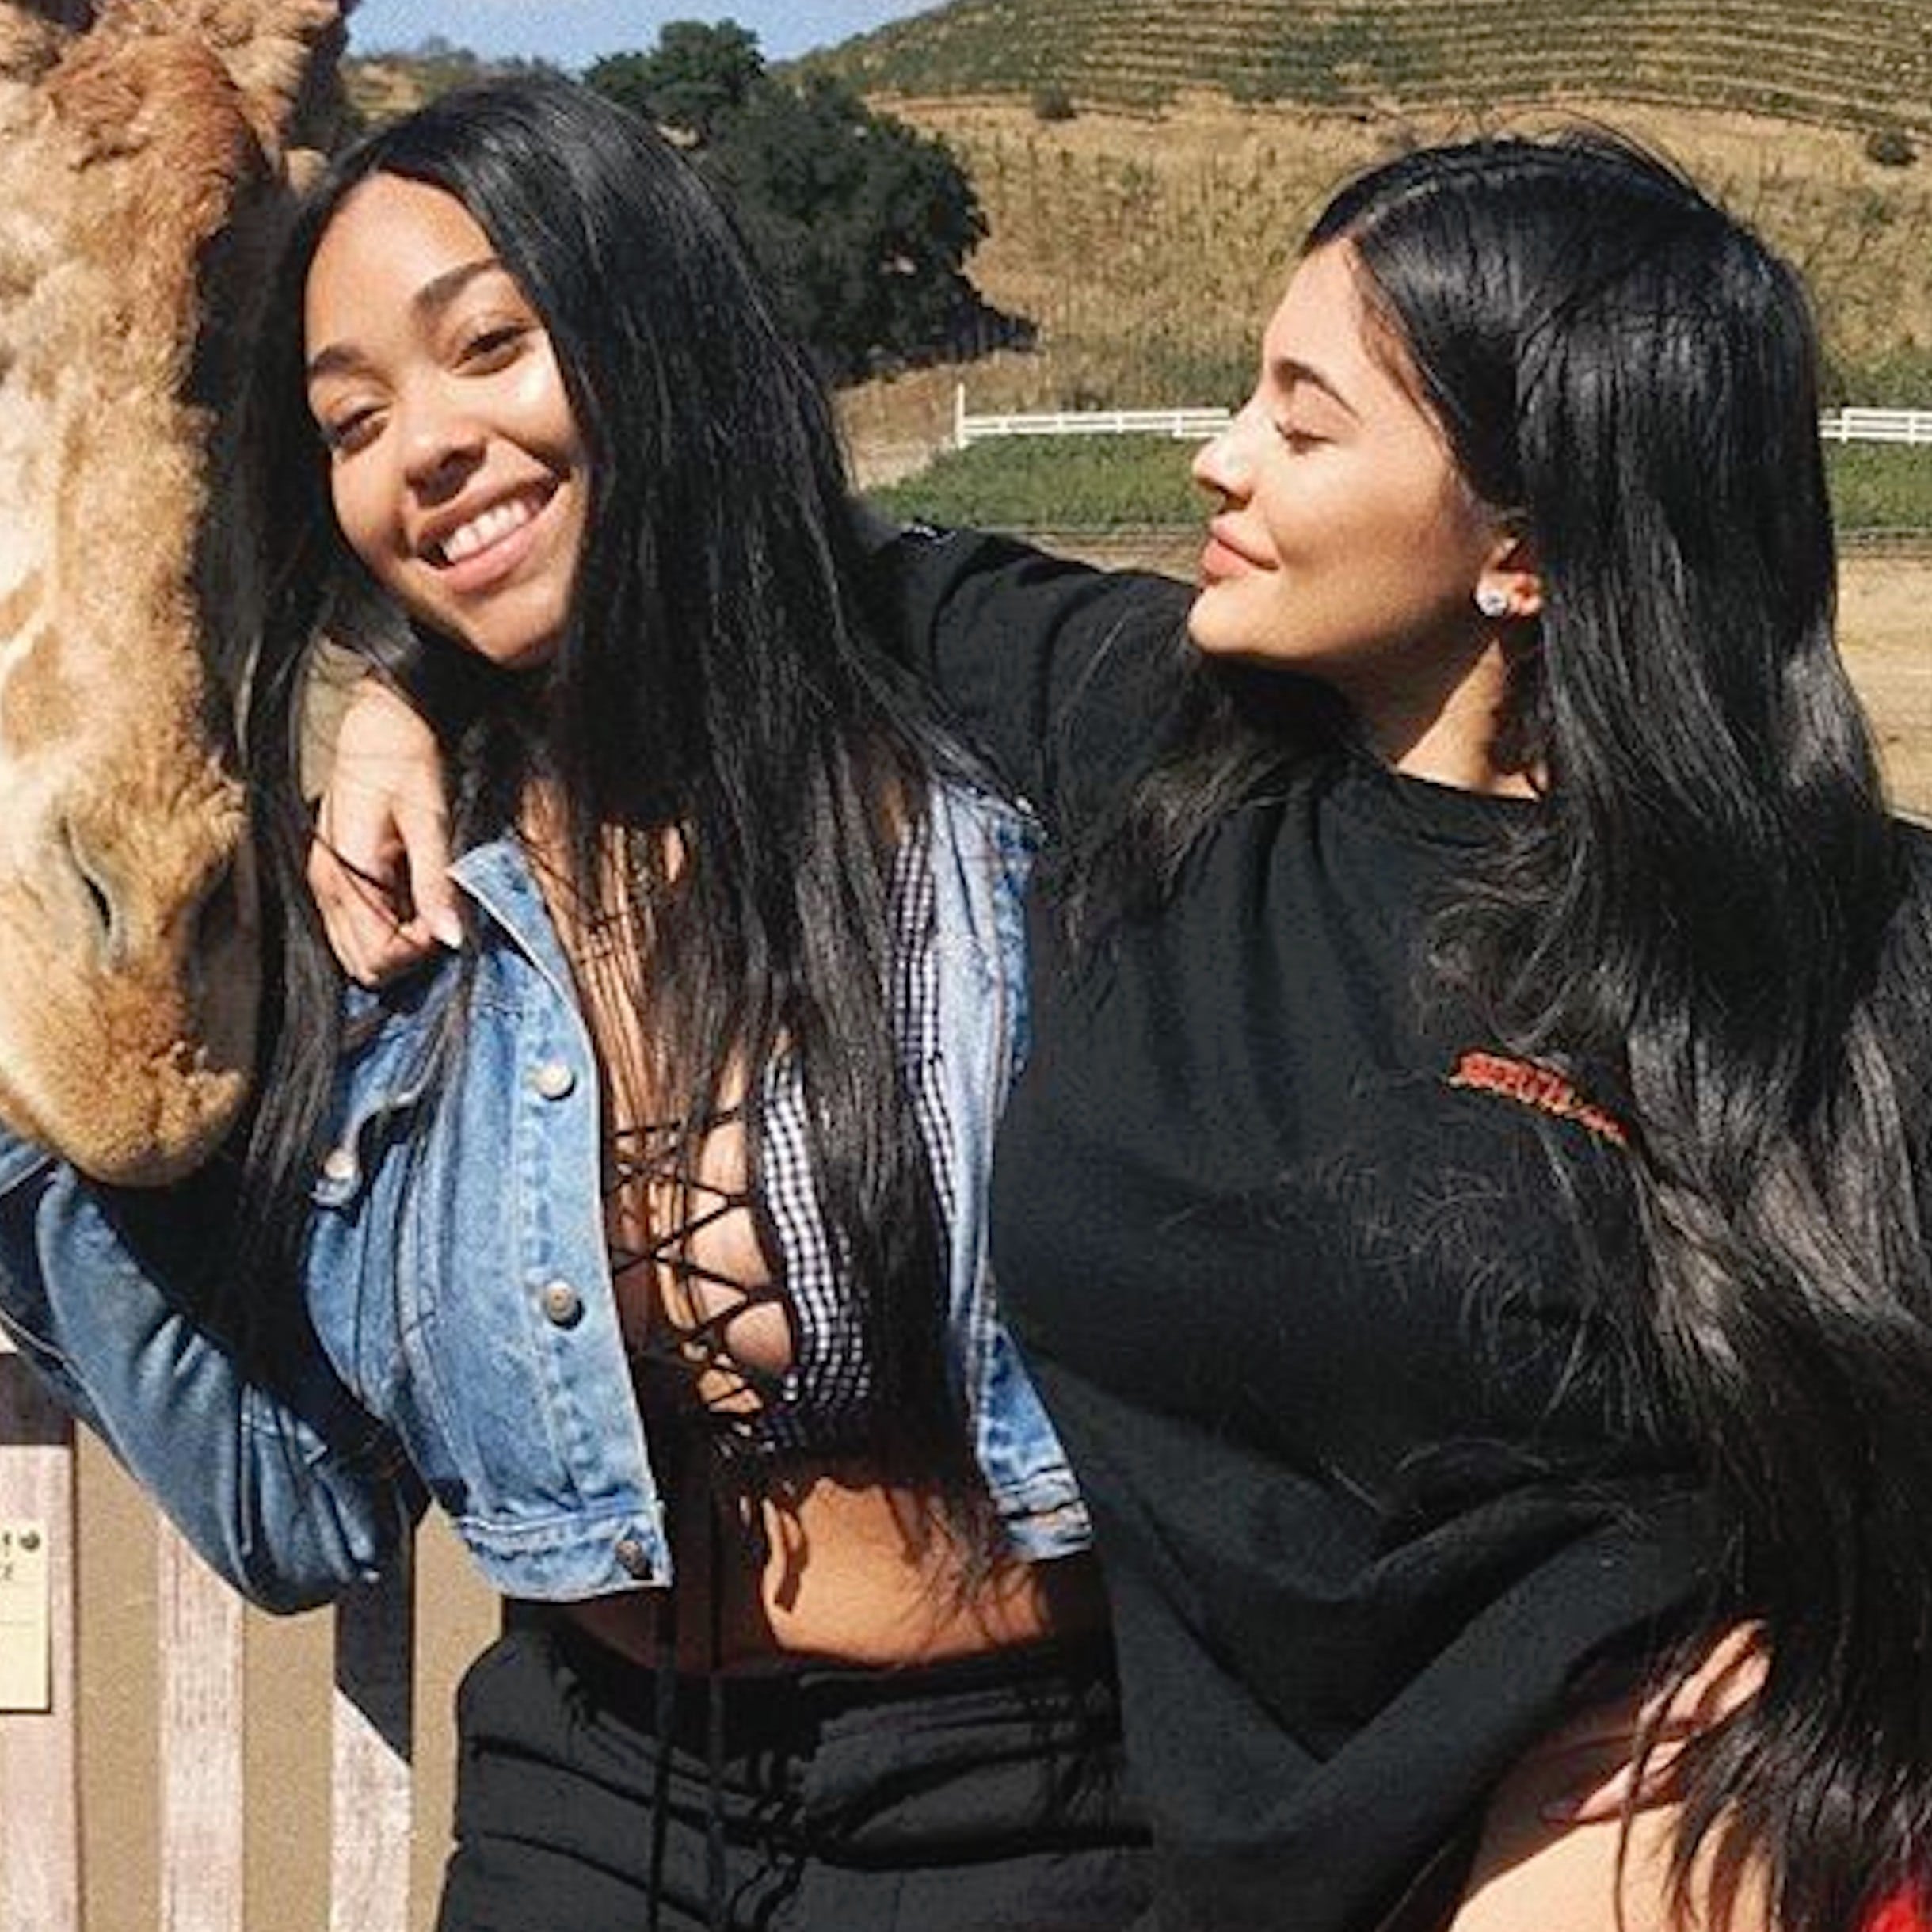 Kylie Jenner & Jordyn Woods Together: Pics Of Their Friendship